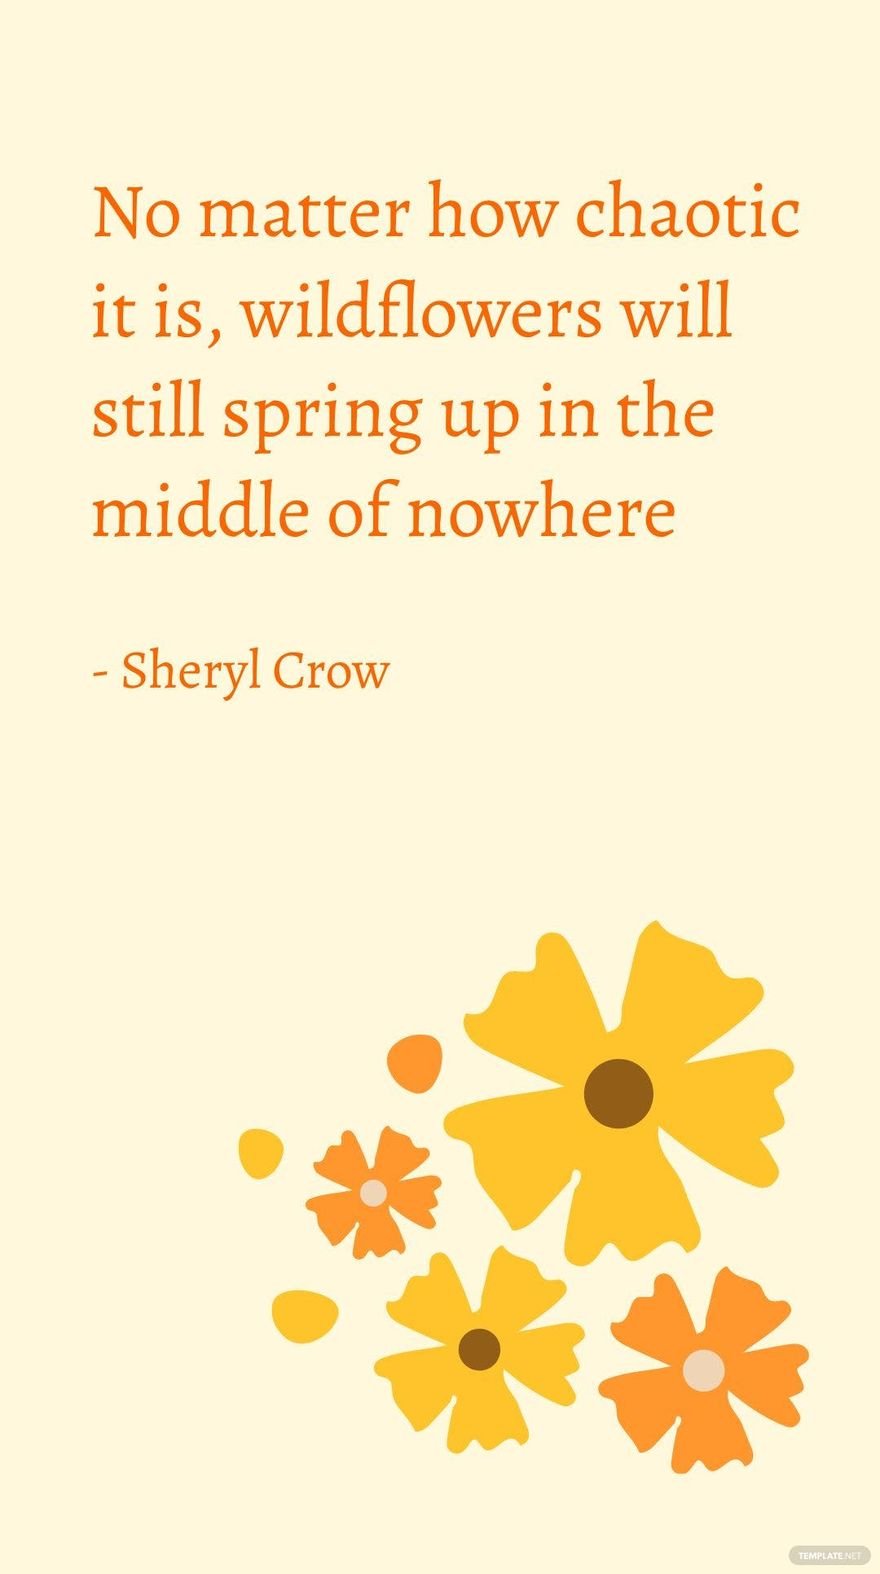 Free Sheryl Crow - No matter how chaotic it is, wildflowers will still spring up in the middle of nowhere in JPG